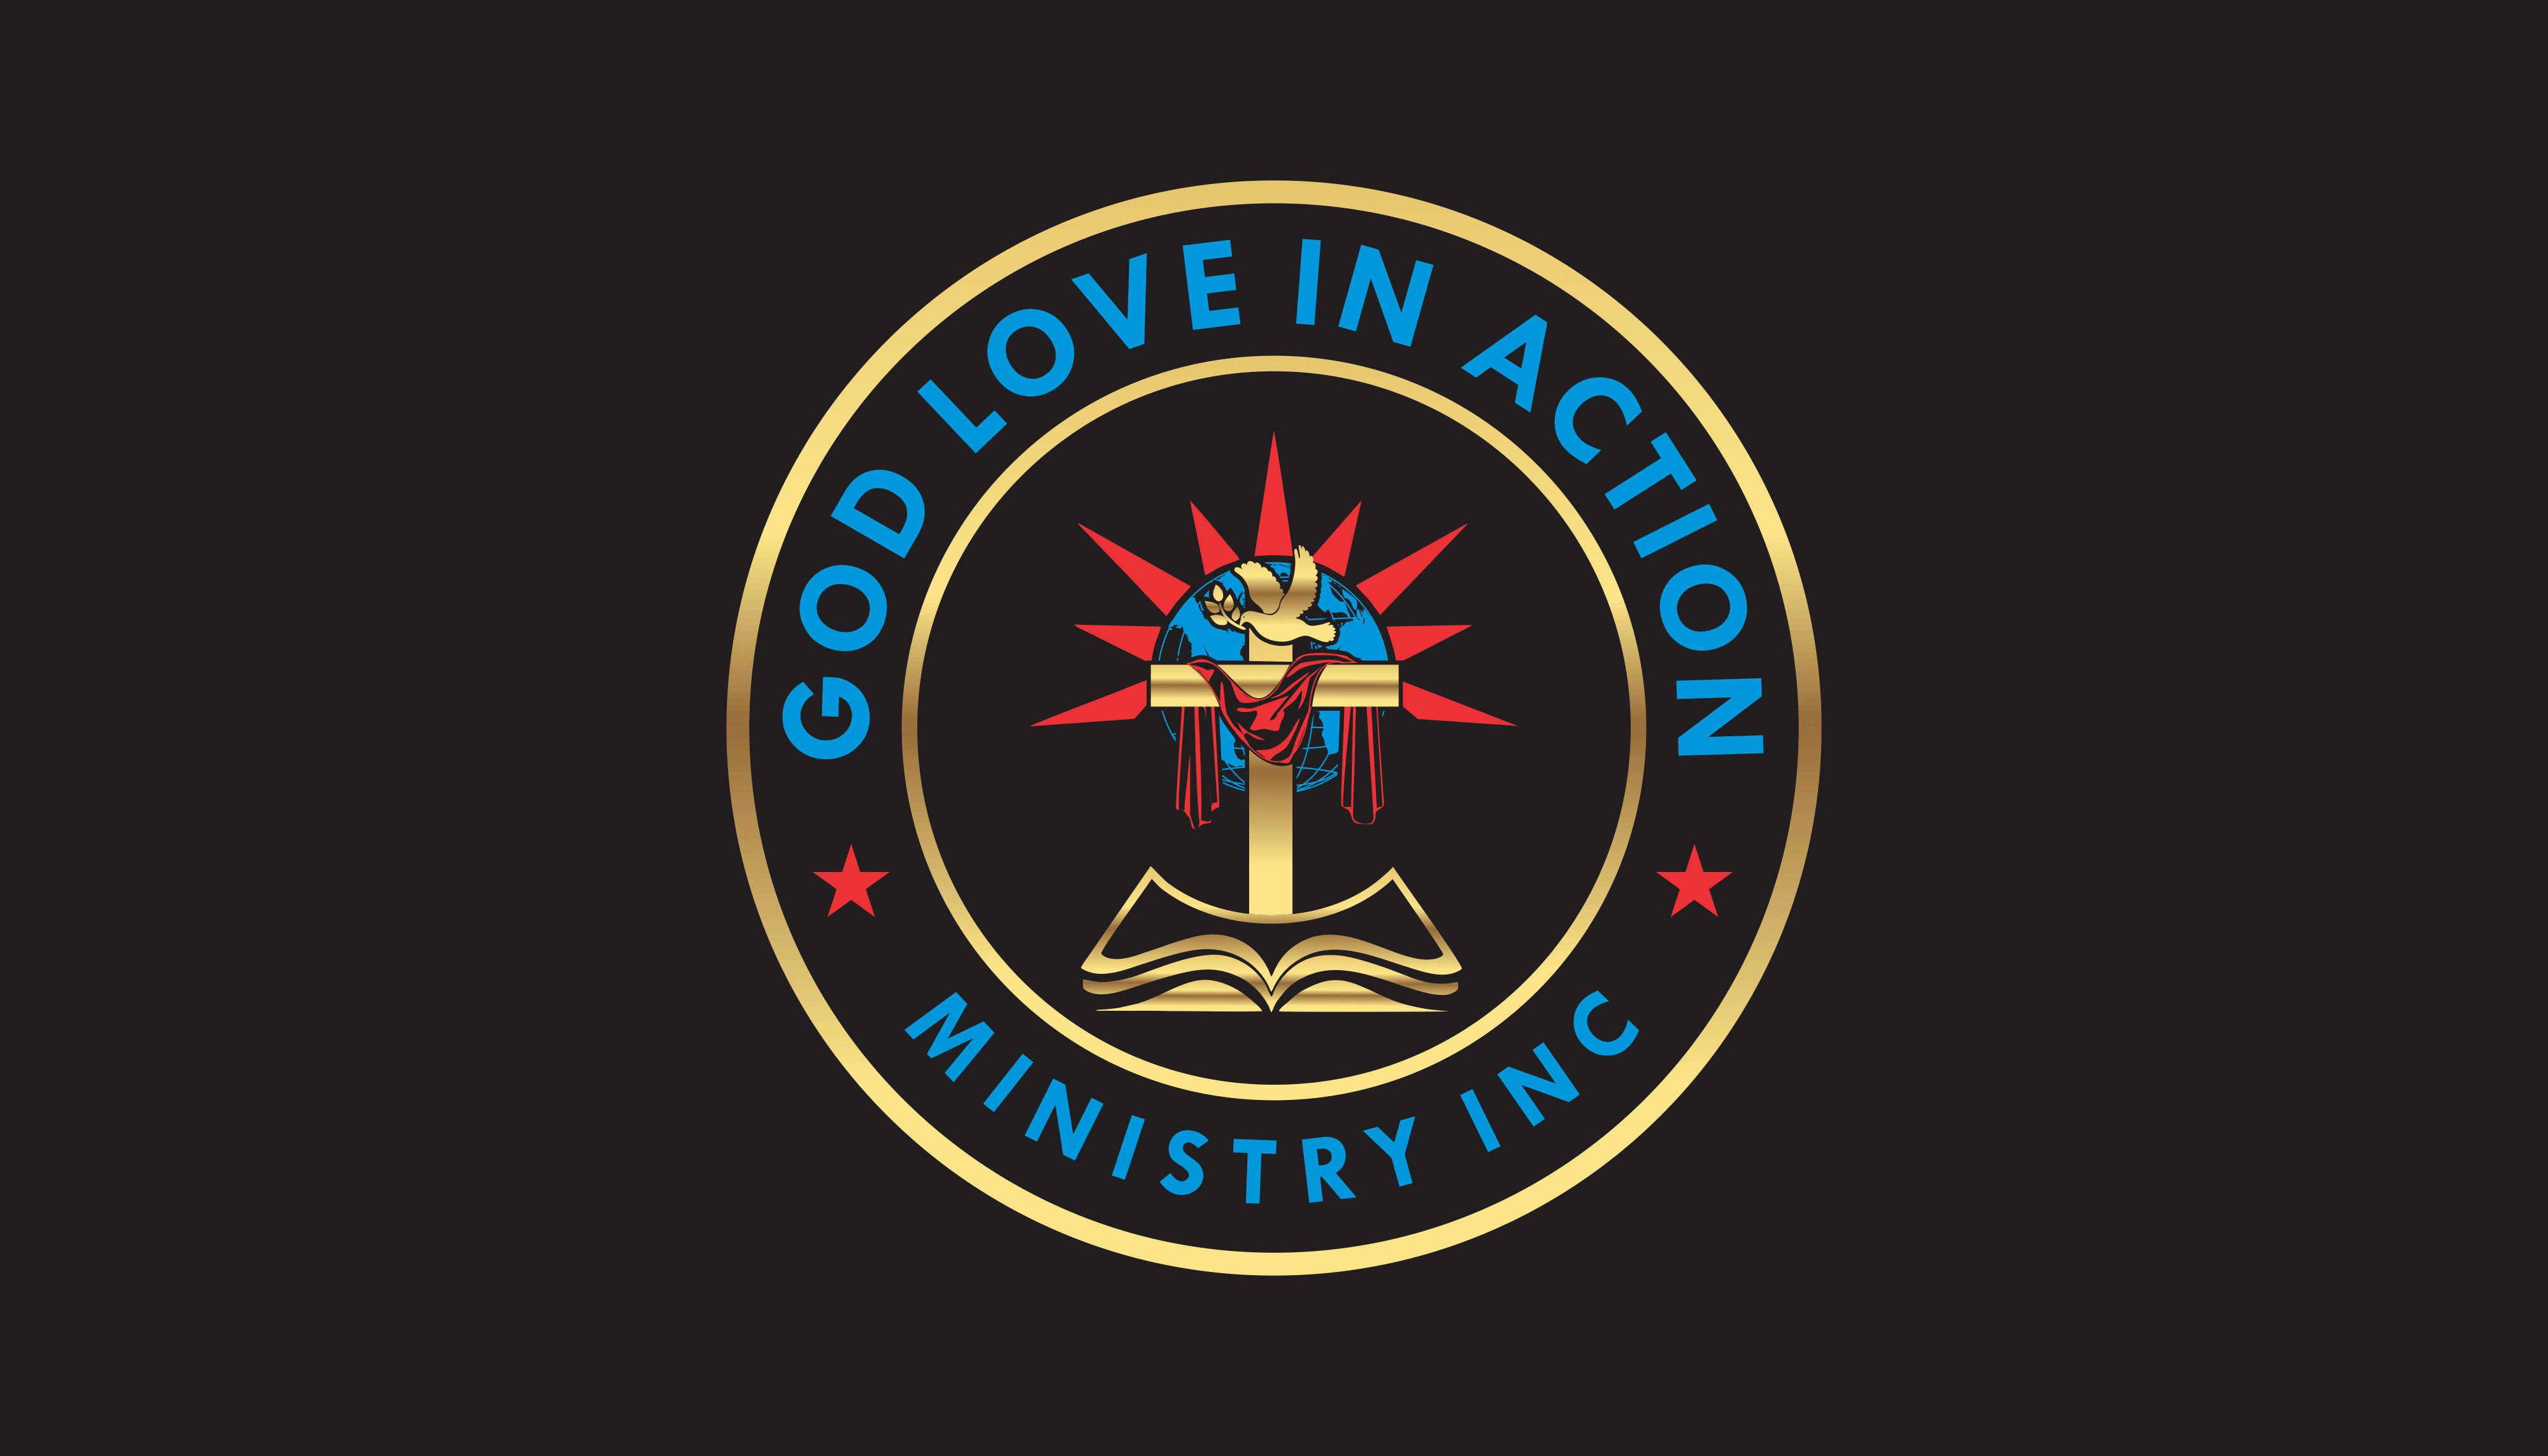 God's Love in Action Ministry INC